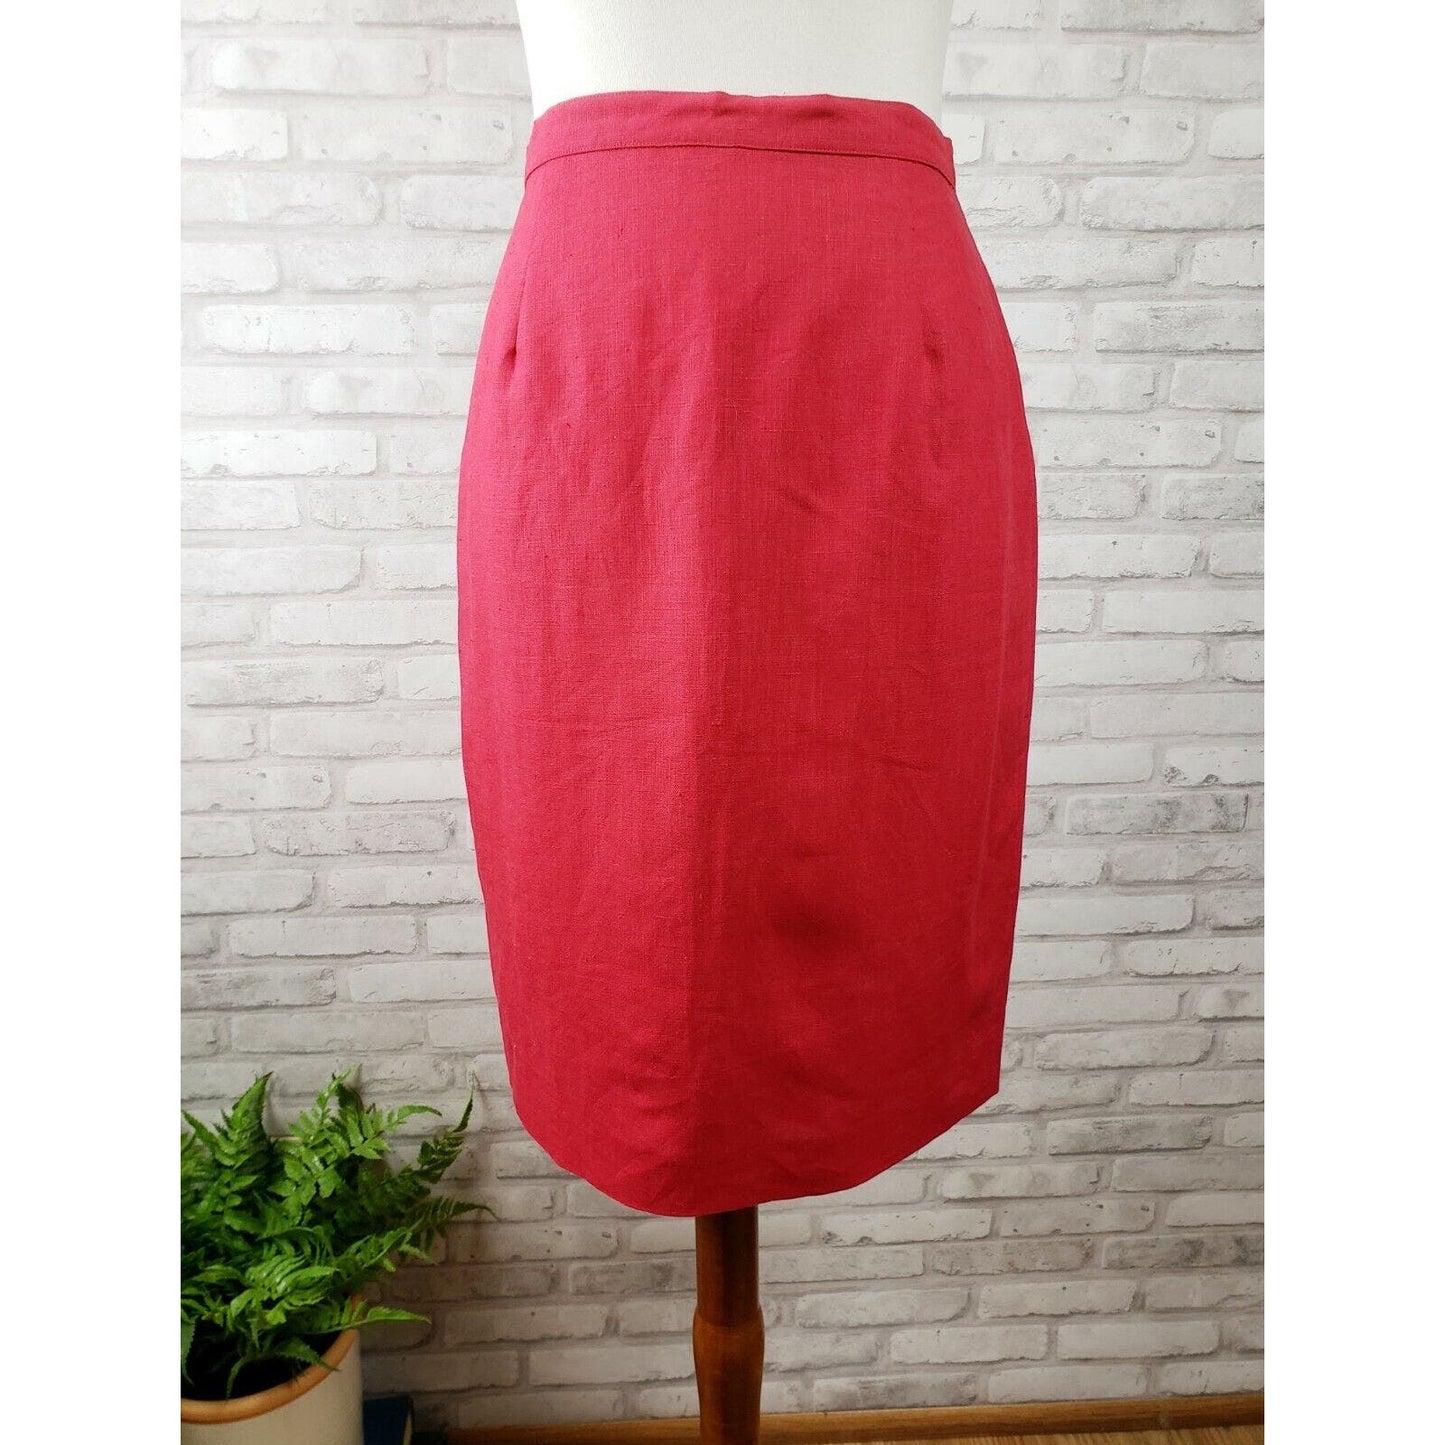 Laura Ashley size 4 camisole and pencil skirt set Lipstick red 100% linen